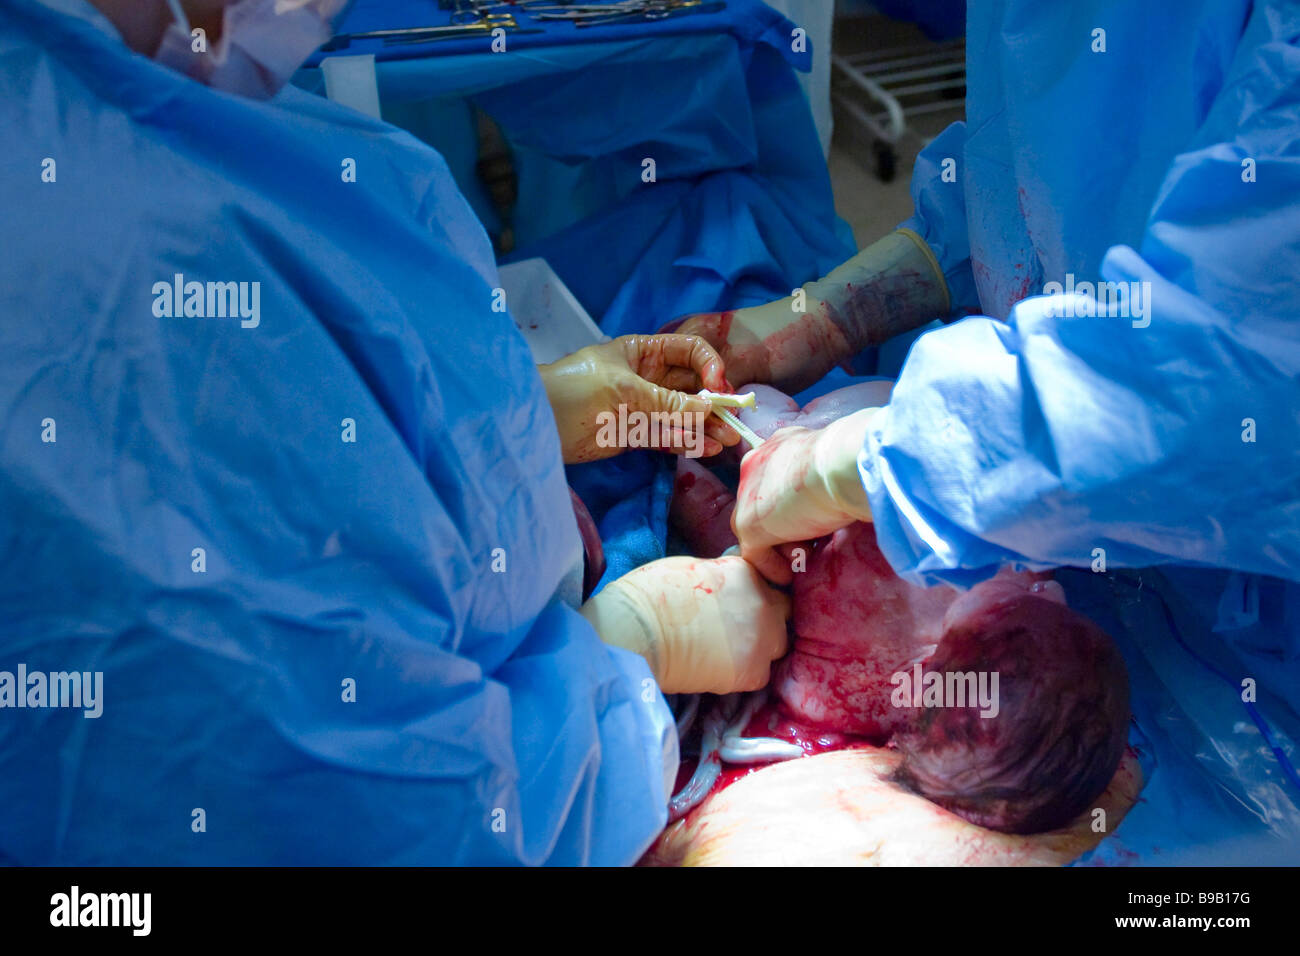 Baby being delivered by caesarean section Stock Photo